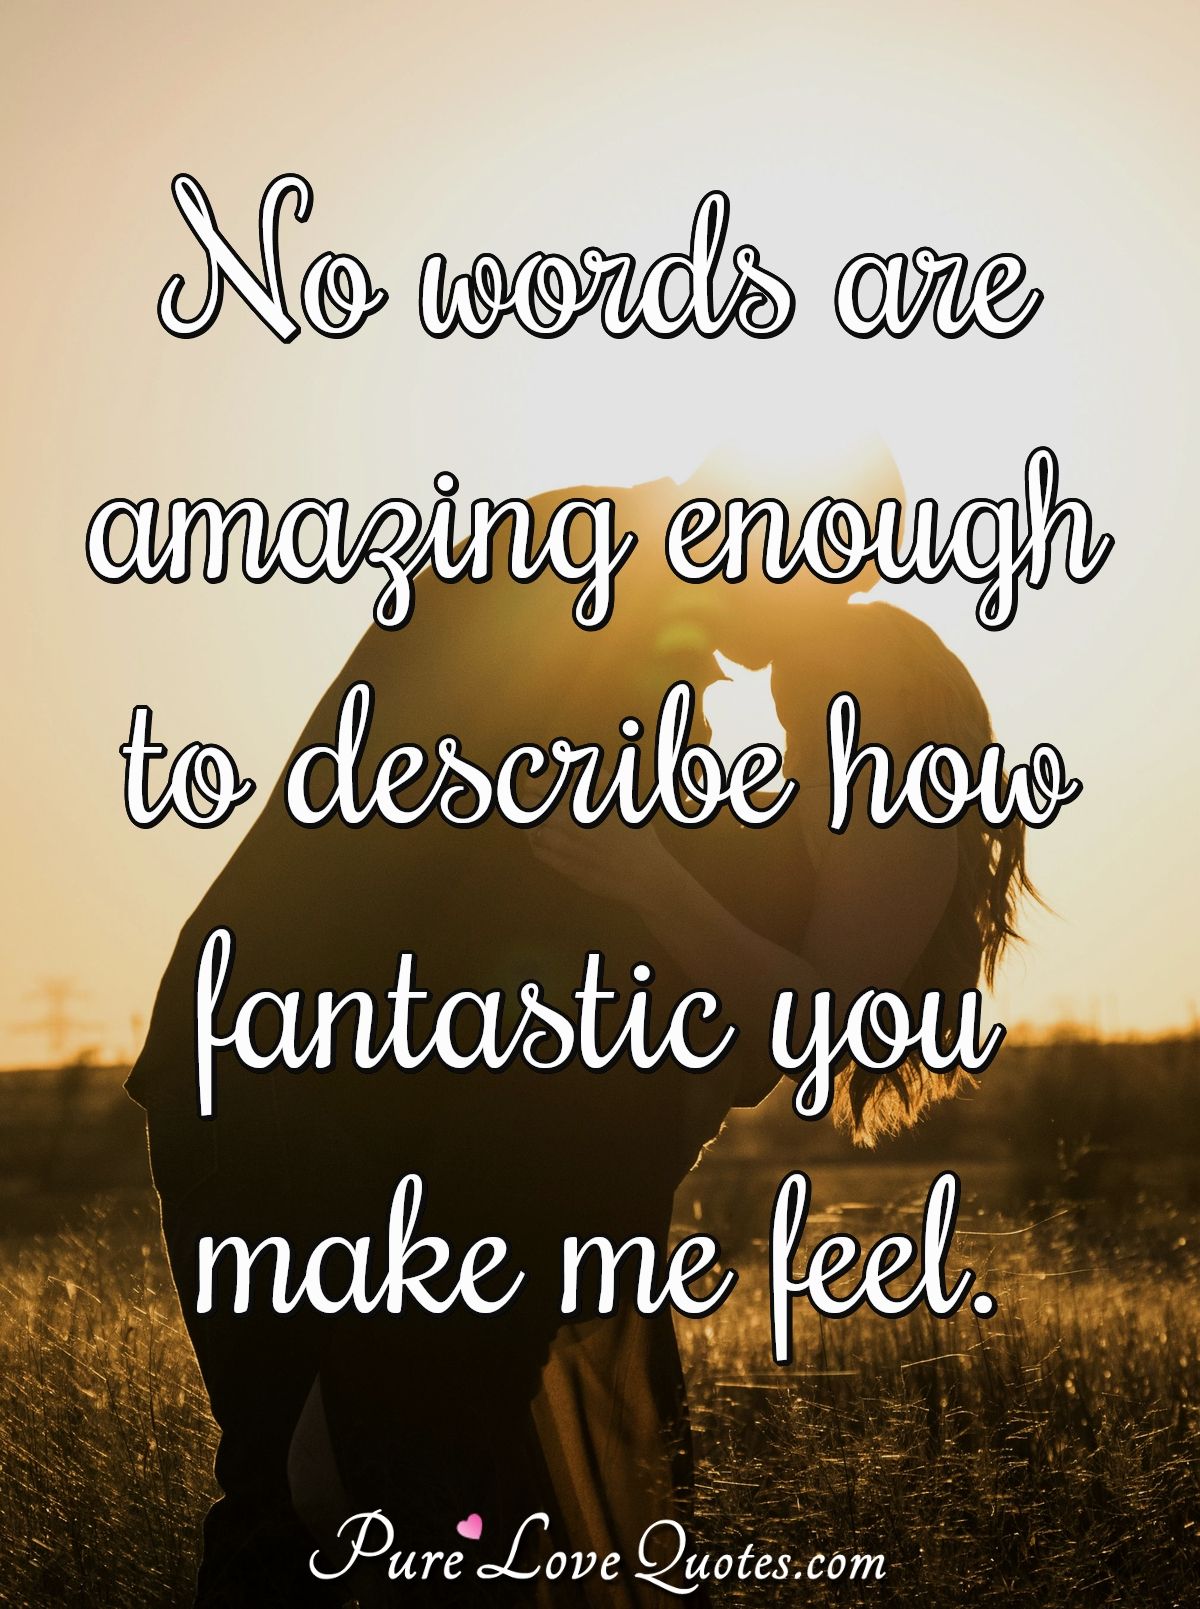 No words are amazing enough to describe how fantastic you make me feel. - Anonymous